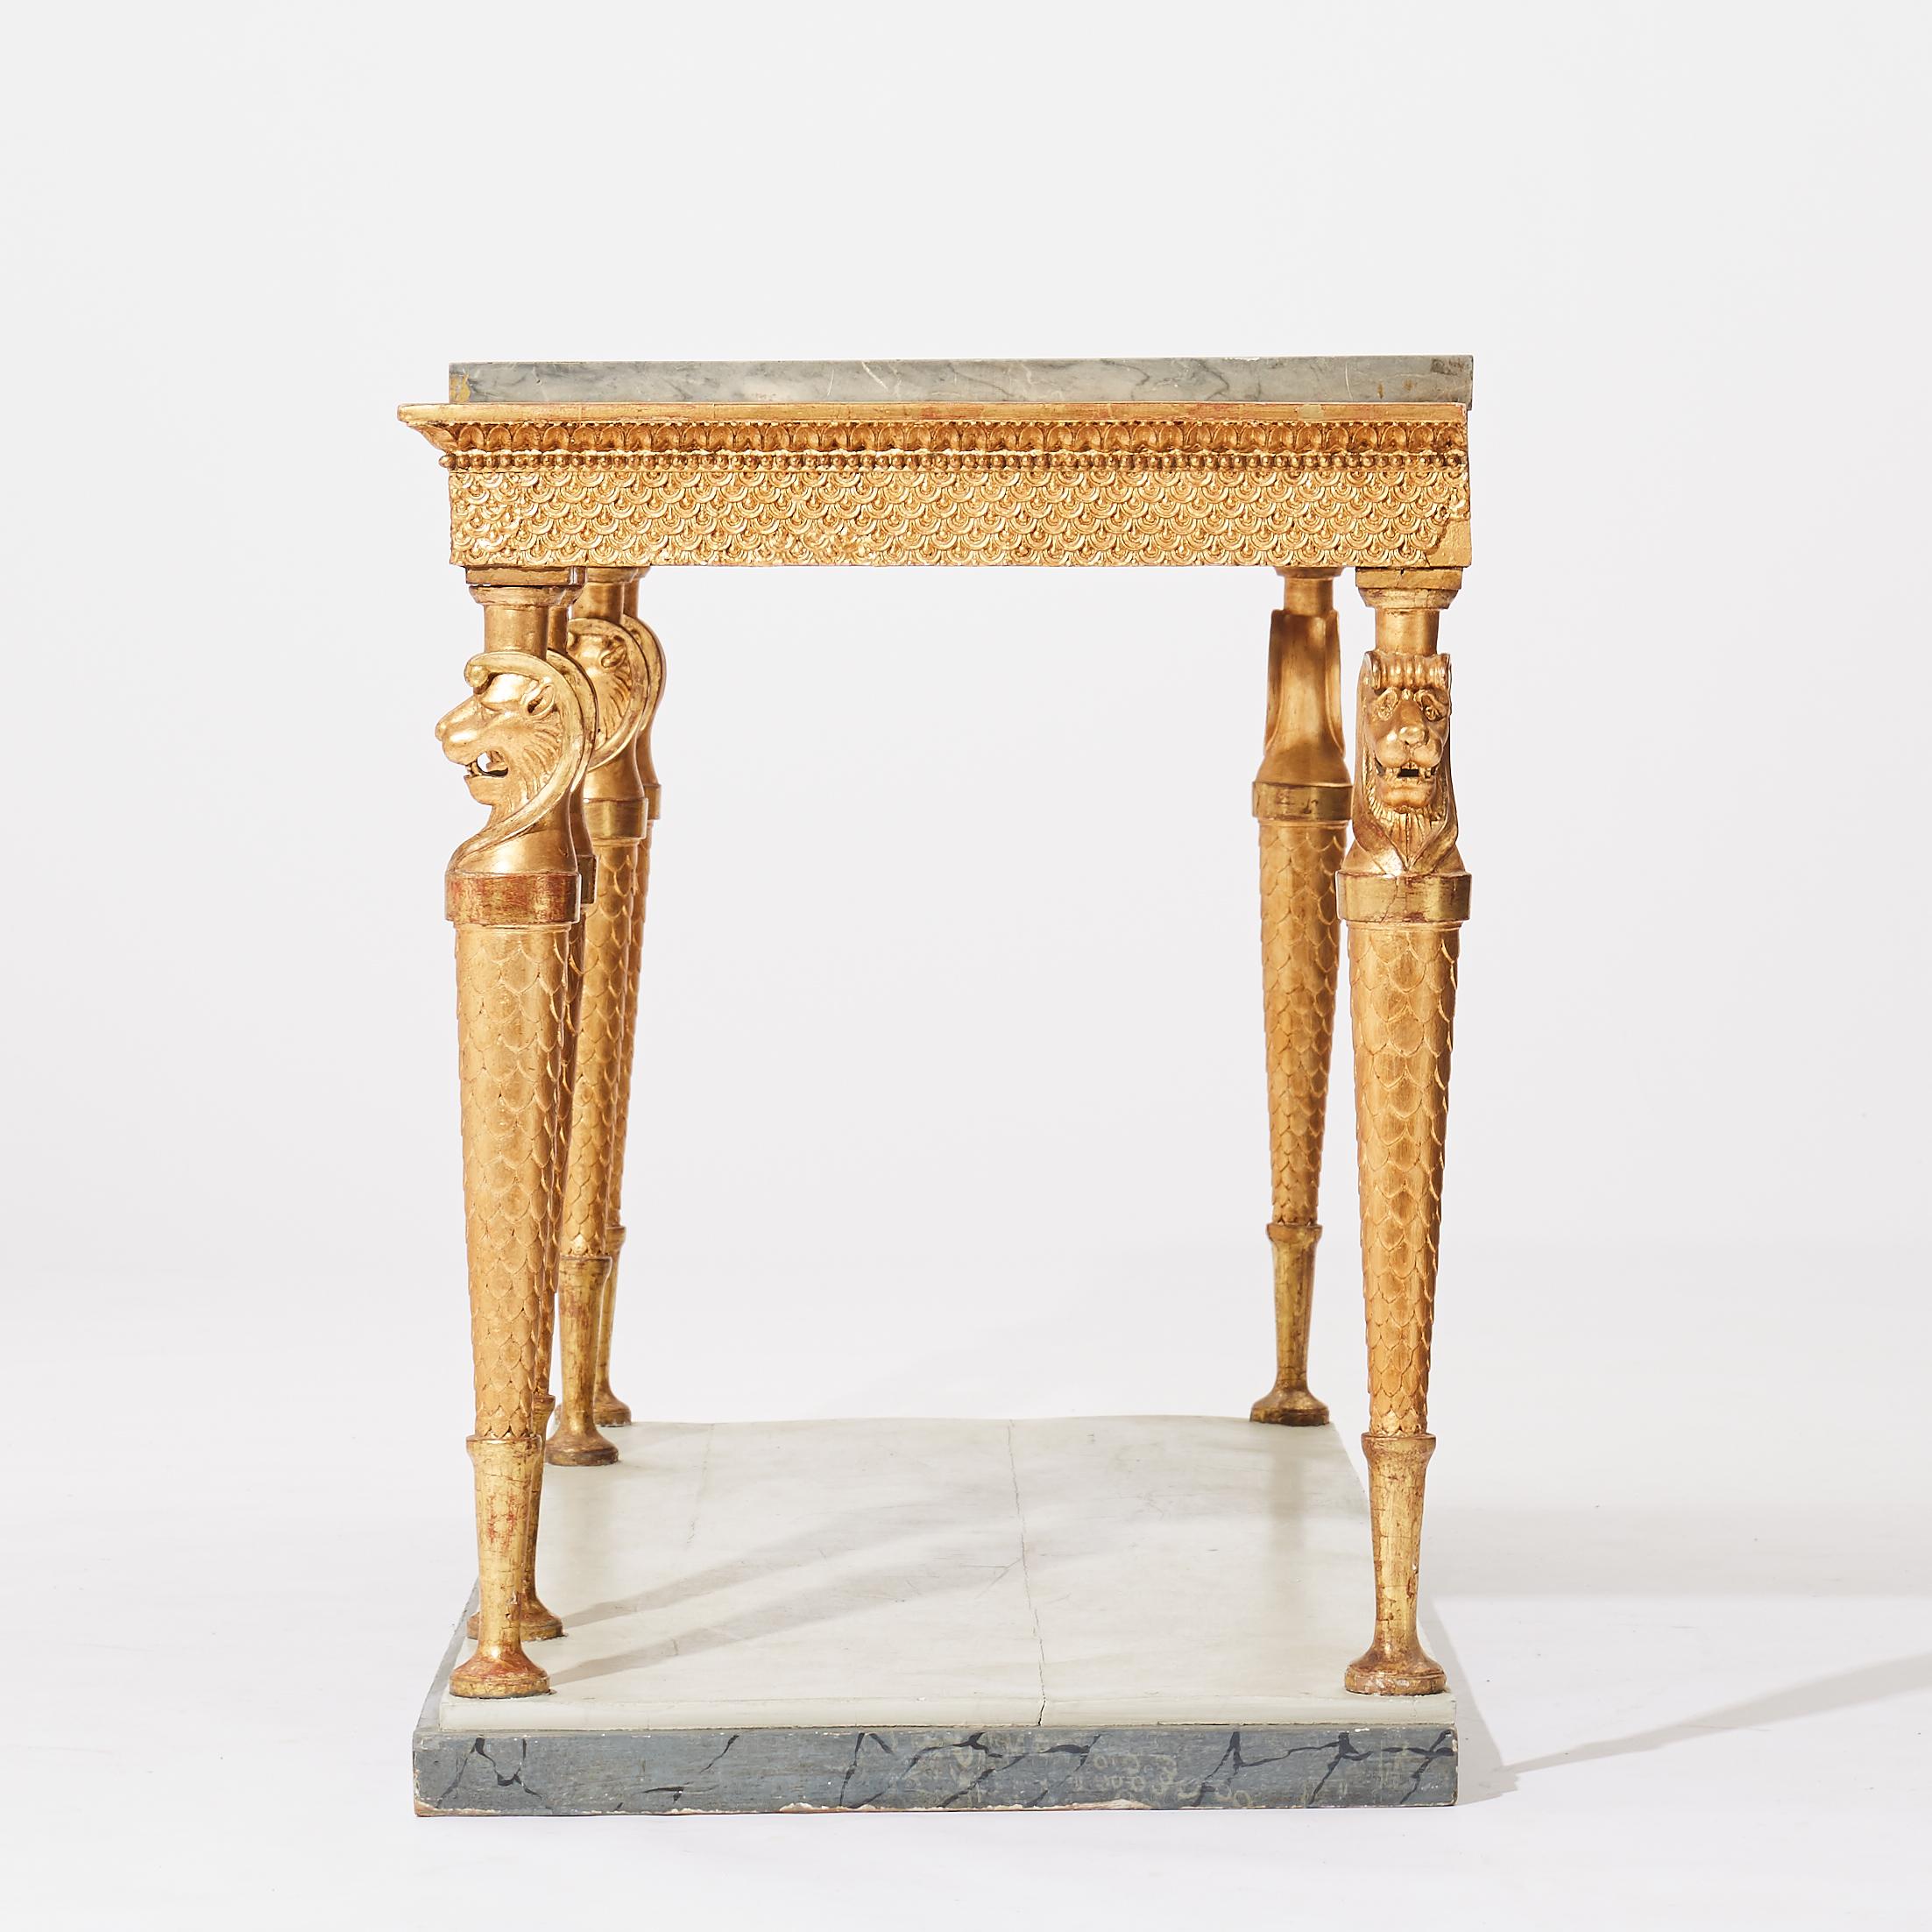 Giltwood A Swedish Empire Gilt wood Console Table, Marble Top, Early 19th Century